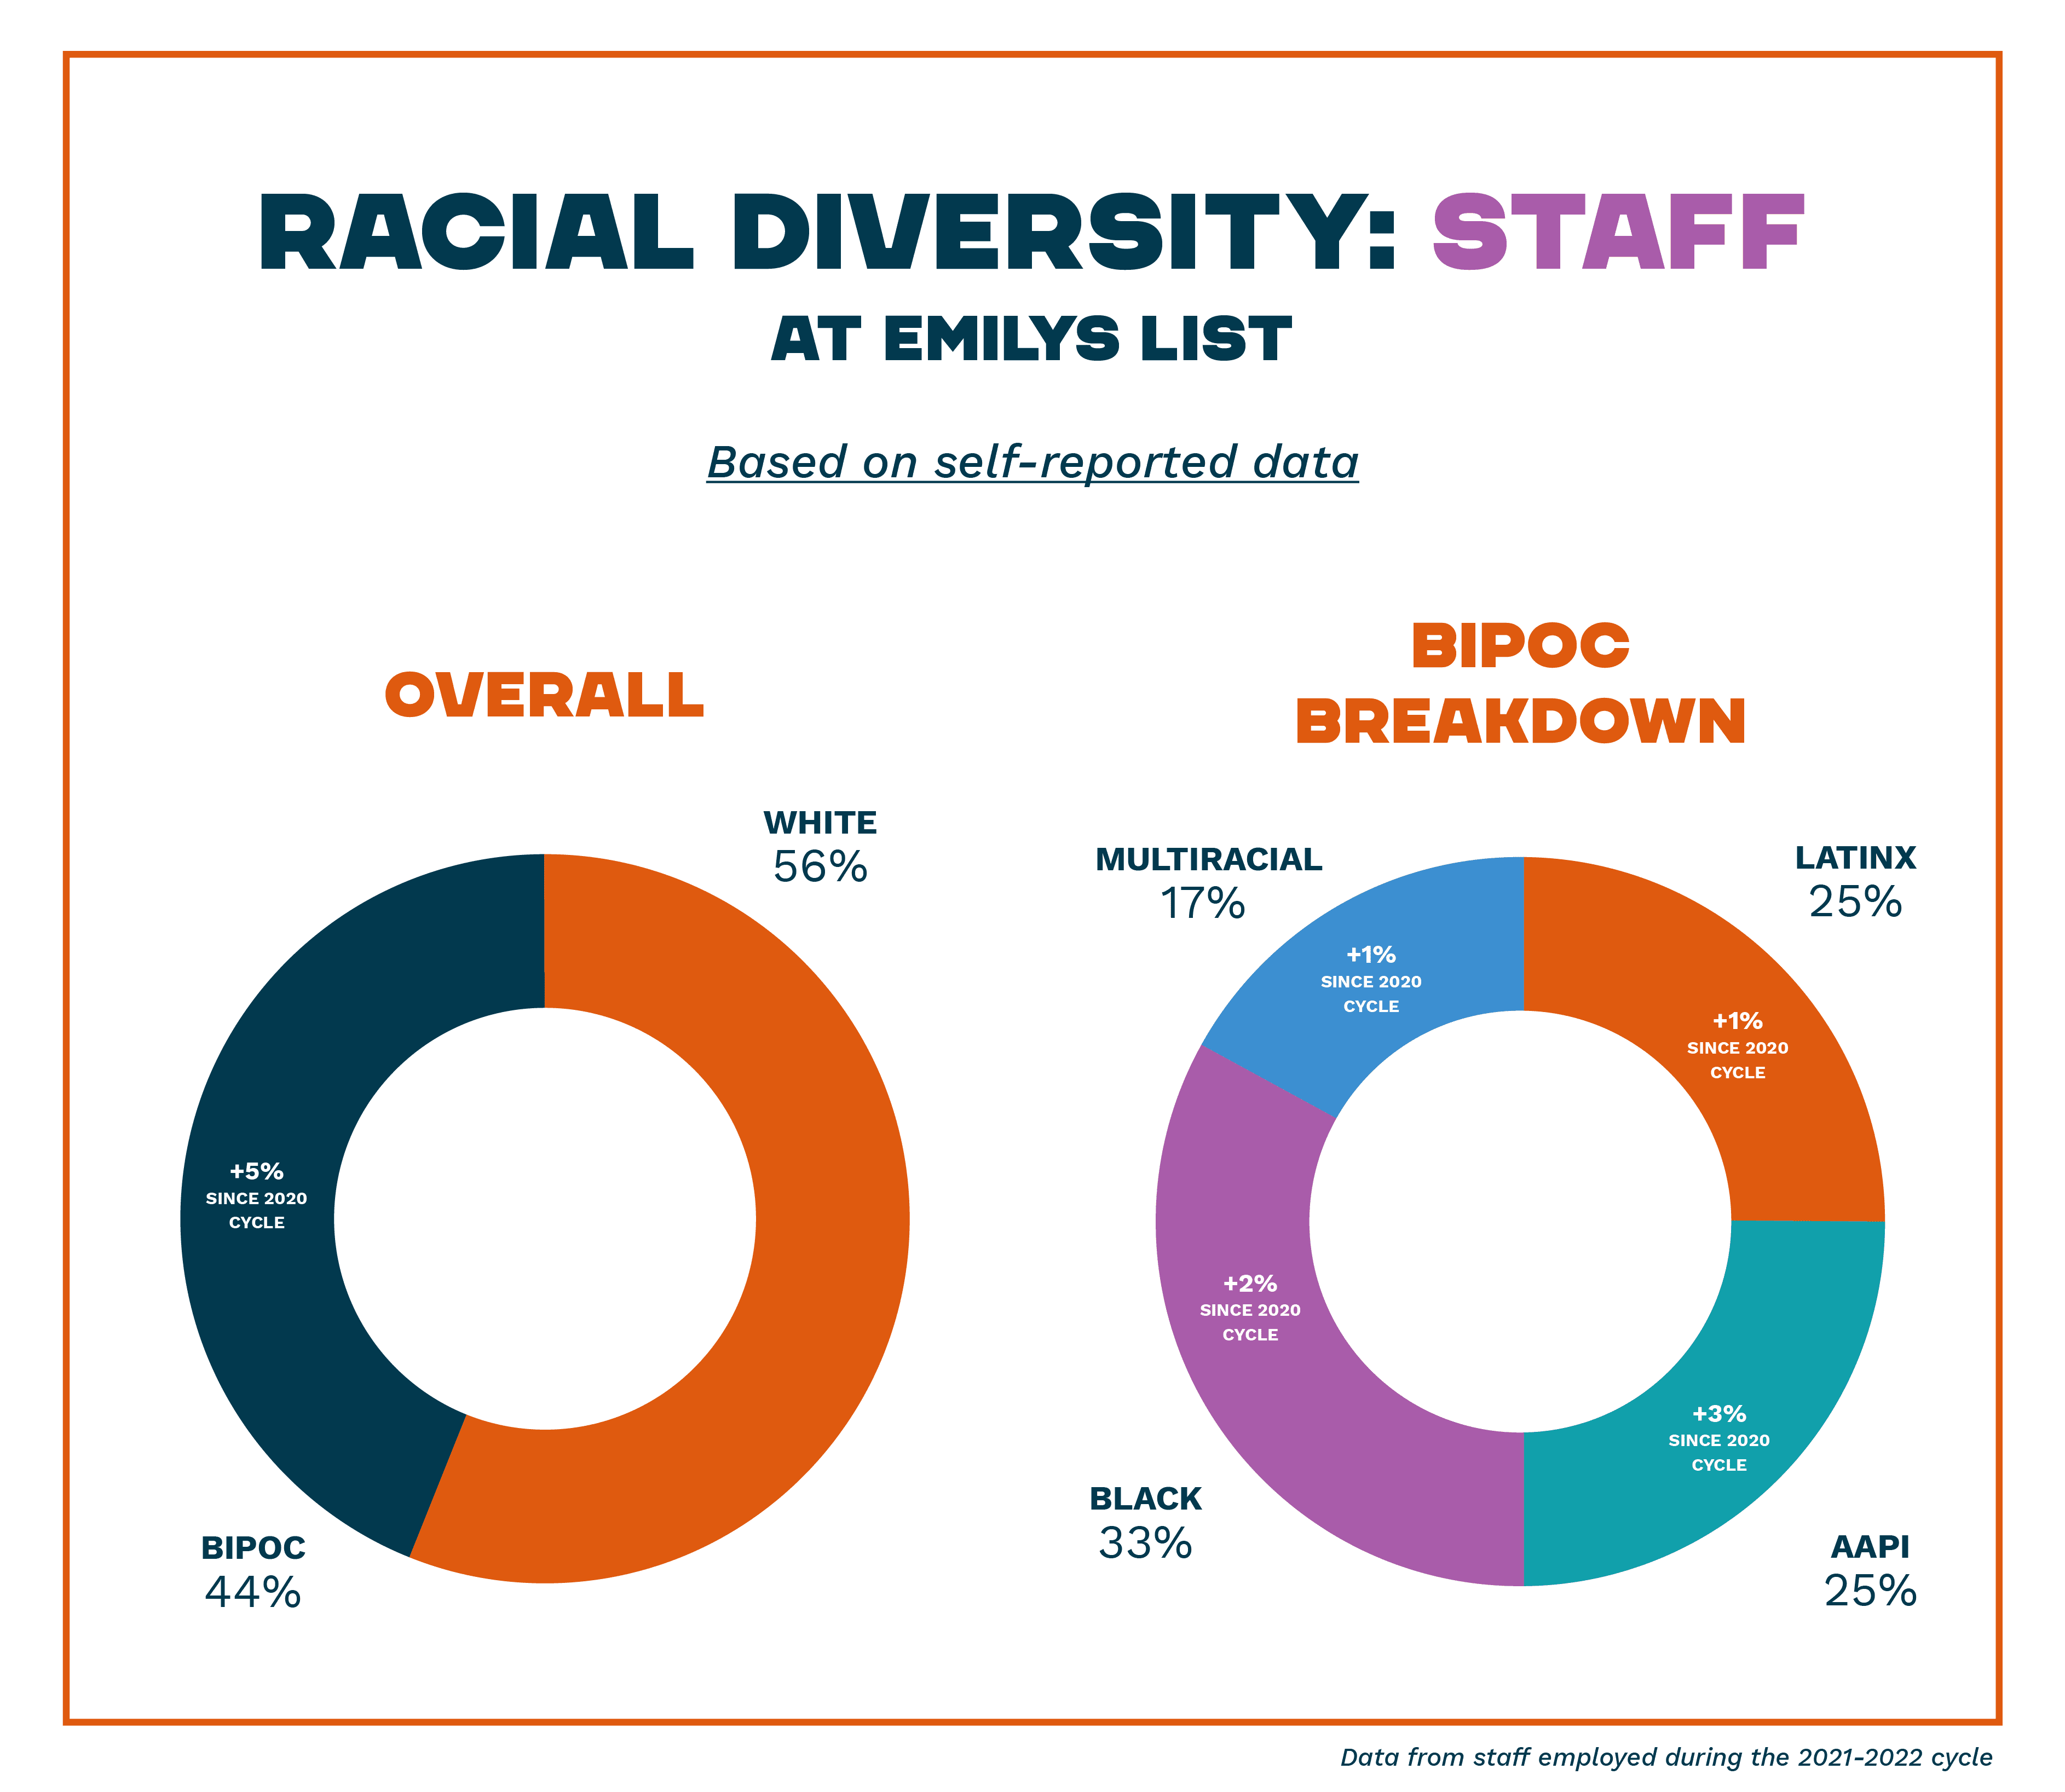 Racial Diversity: Staff at EMILYs List - Based on self-reported data - Overall: White 56%, BIPOC 44% (5% increase since 2020 cycle). - BIPOC Breakdown: Black 33% (2% increase since 2020 cycle), AAPI 25% (3% increase since 2020 cycle), Latinx 25% (1% increase since 2020 cycle), Multiracial 17% (1% increase since 2020 cycle) - Data from staff employed during the 2021-2022 cycle